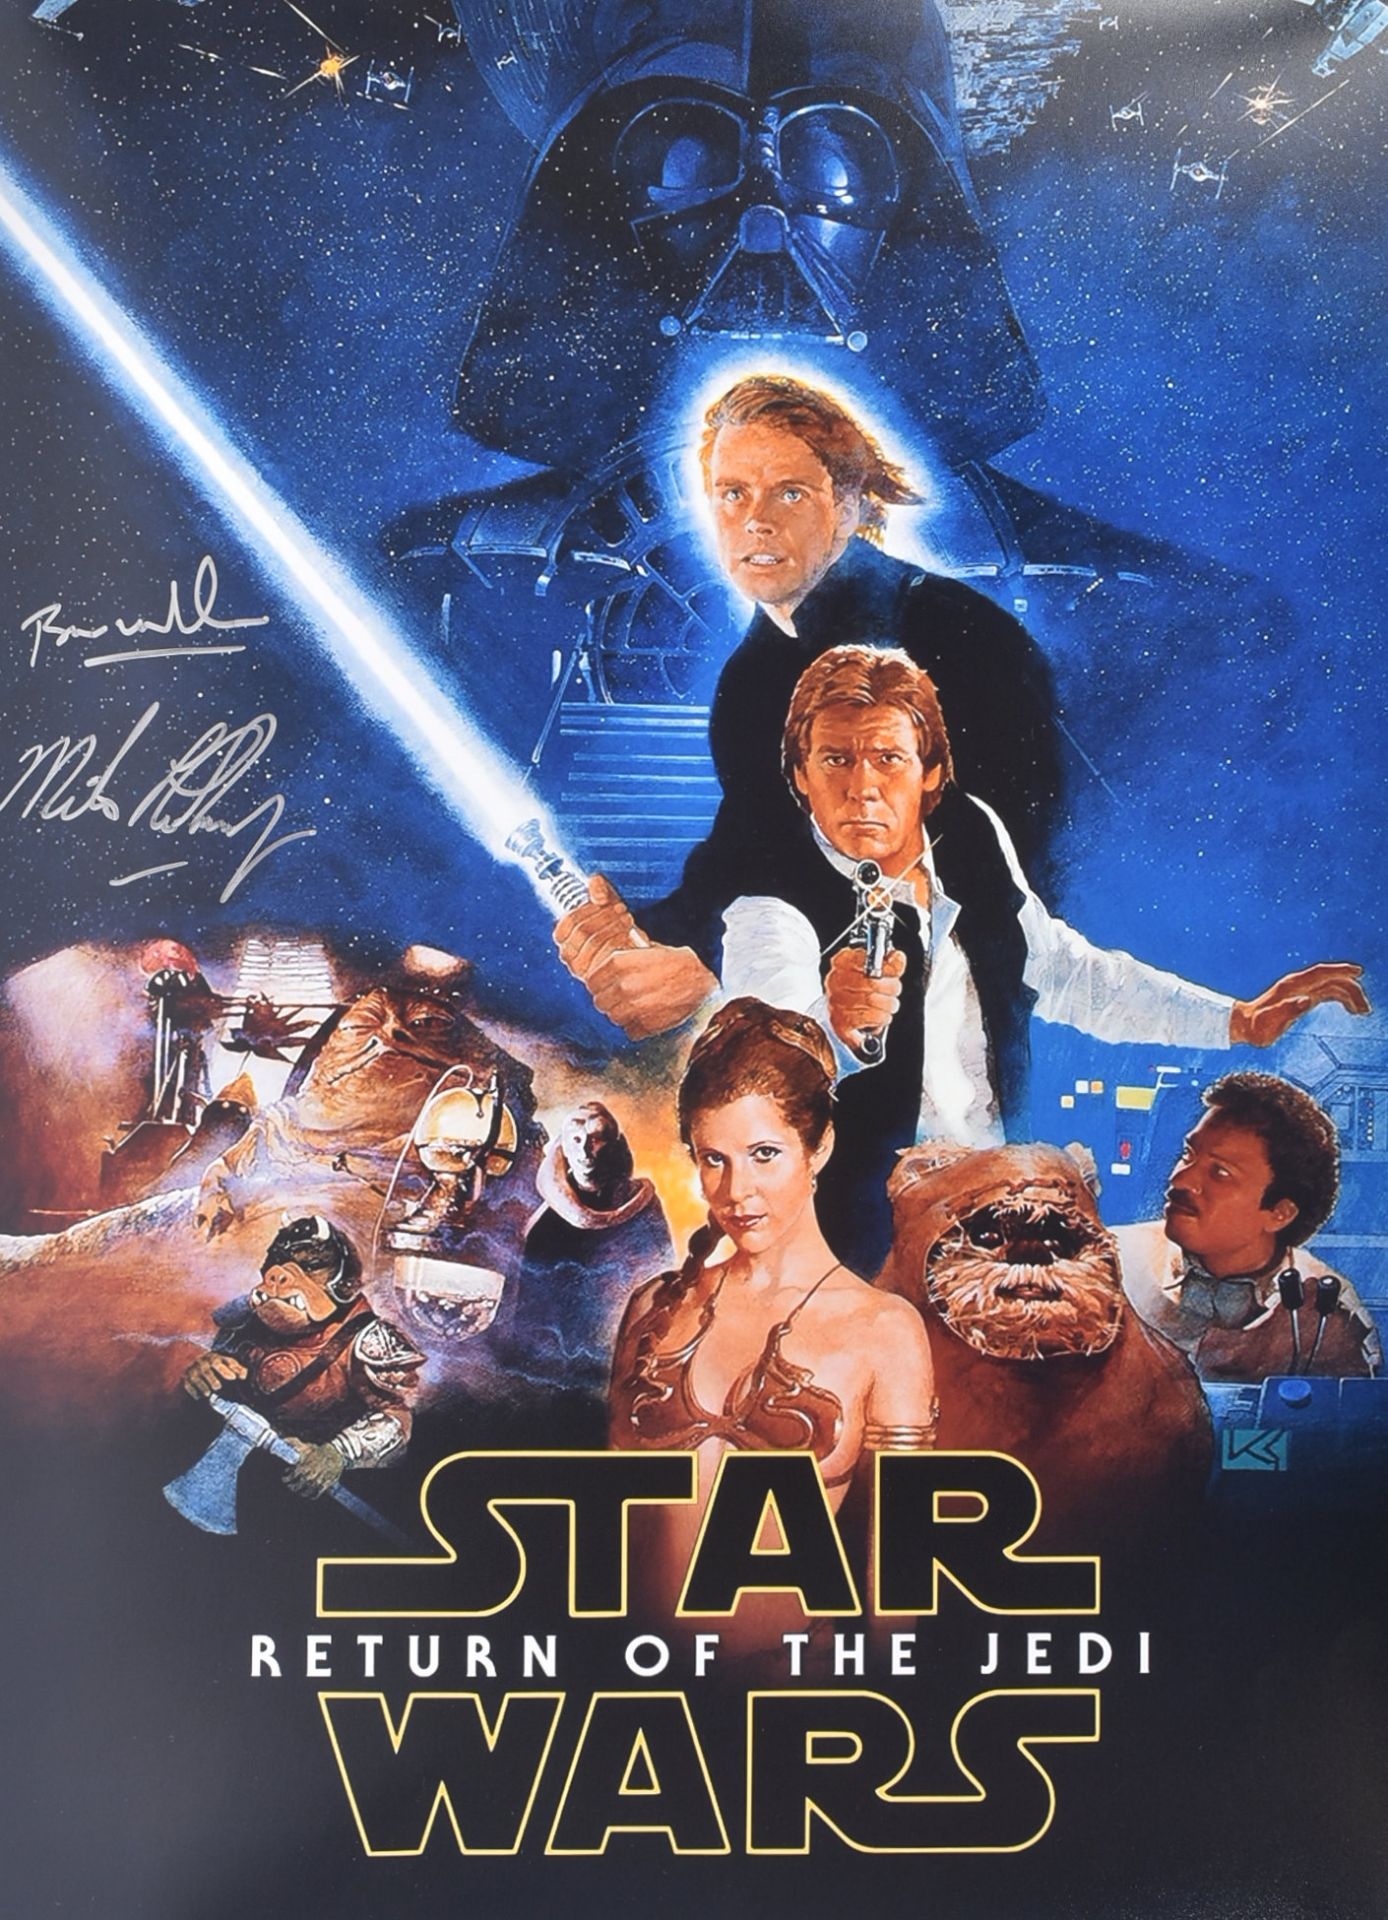 STAR WARS - RETURN OF THE JEDI - AUTOGRAPHED POSTER